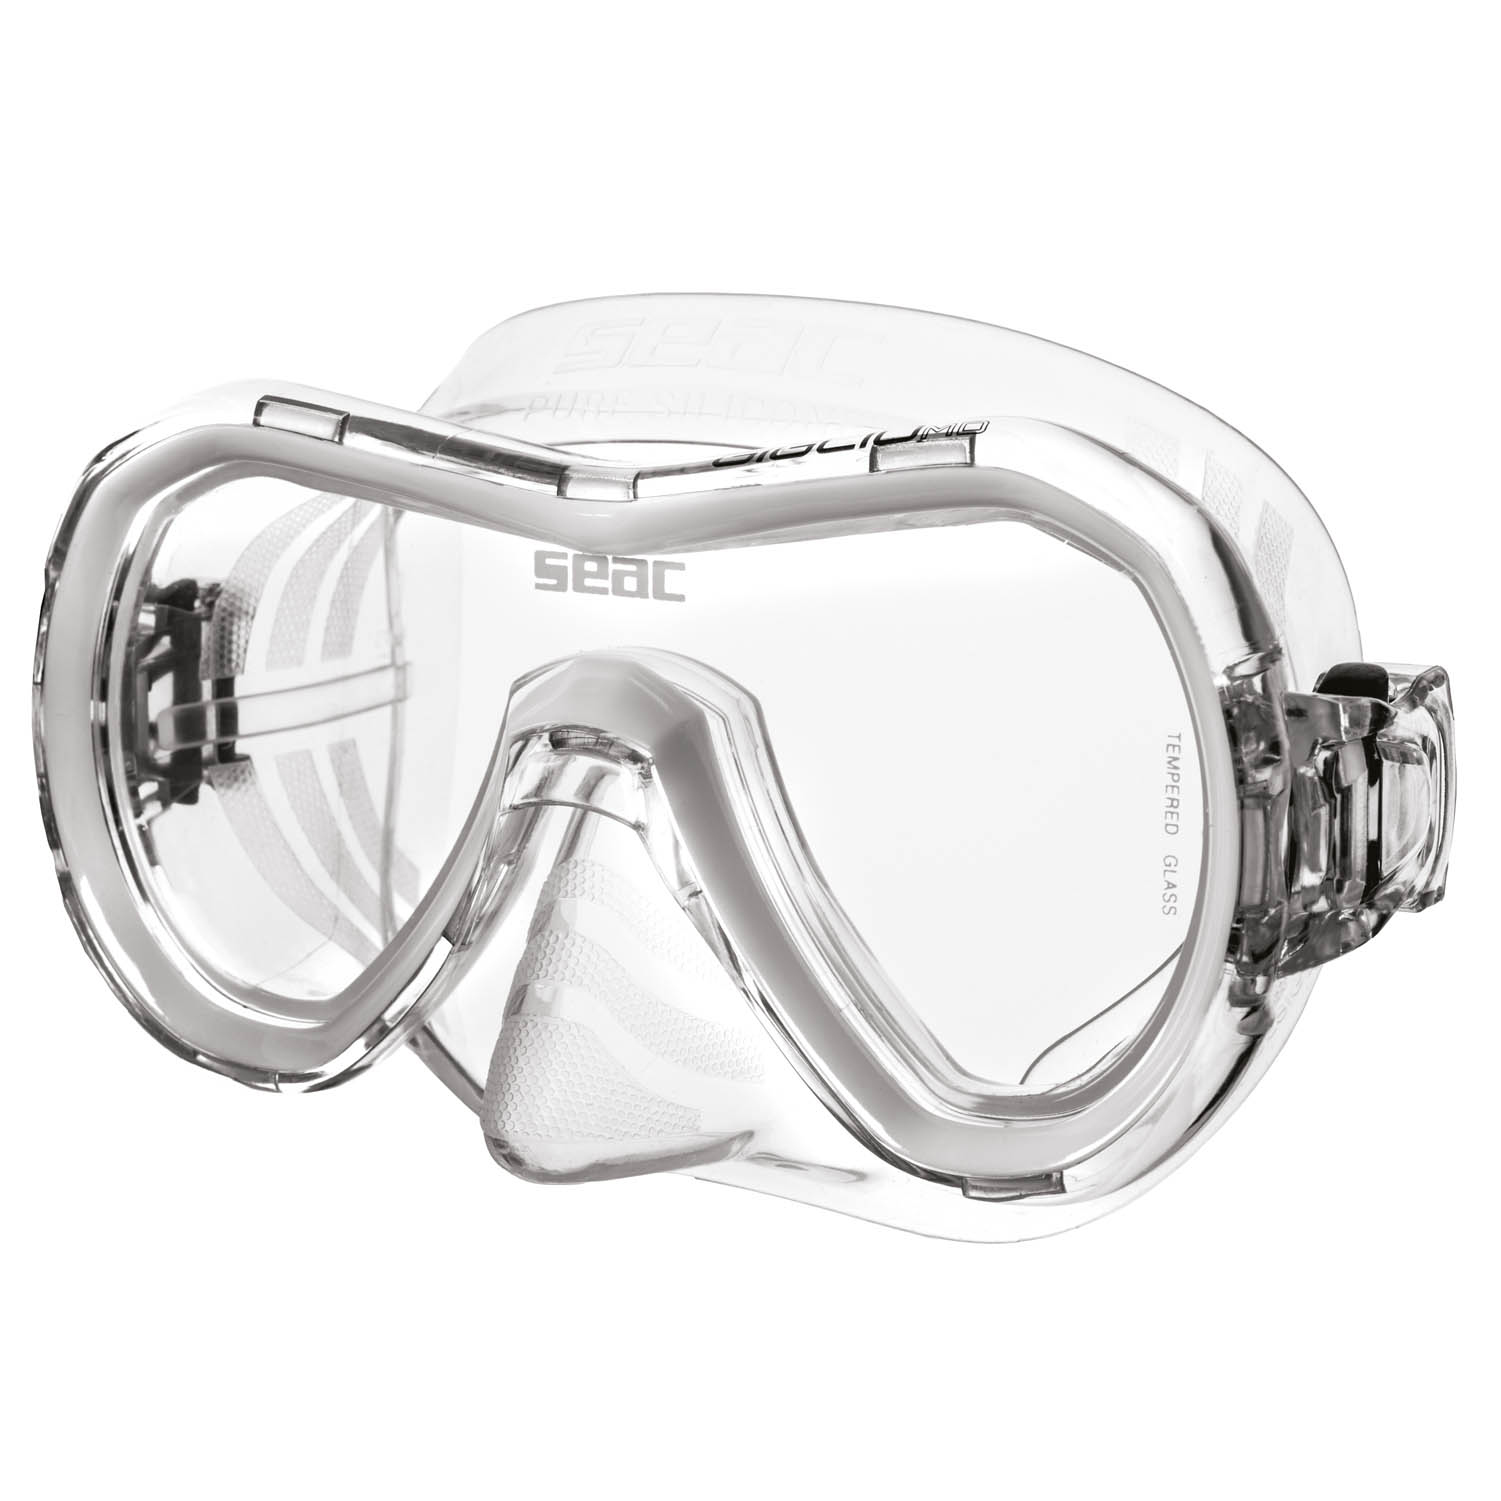 SEAC SUB GIGLIO MD S/KL DIVING EYEGLASSES - Picture 1 of 1